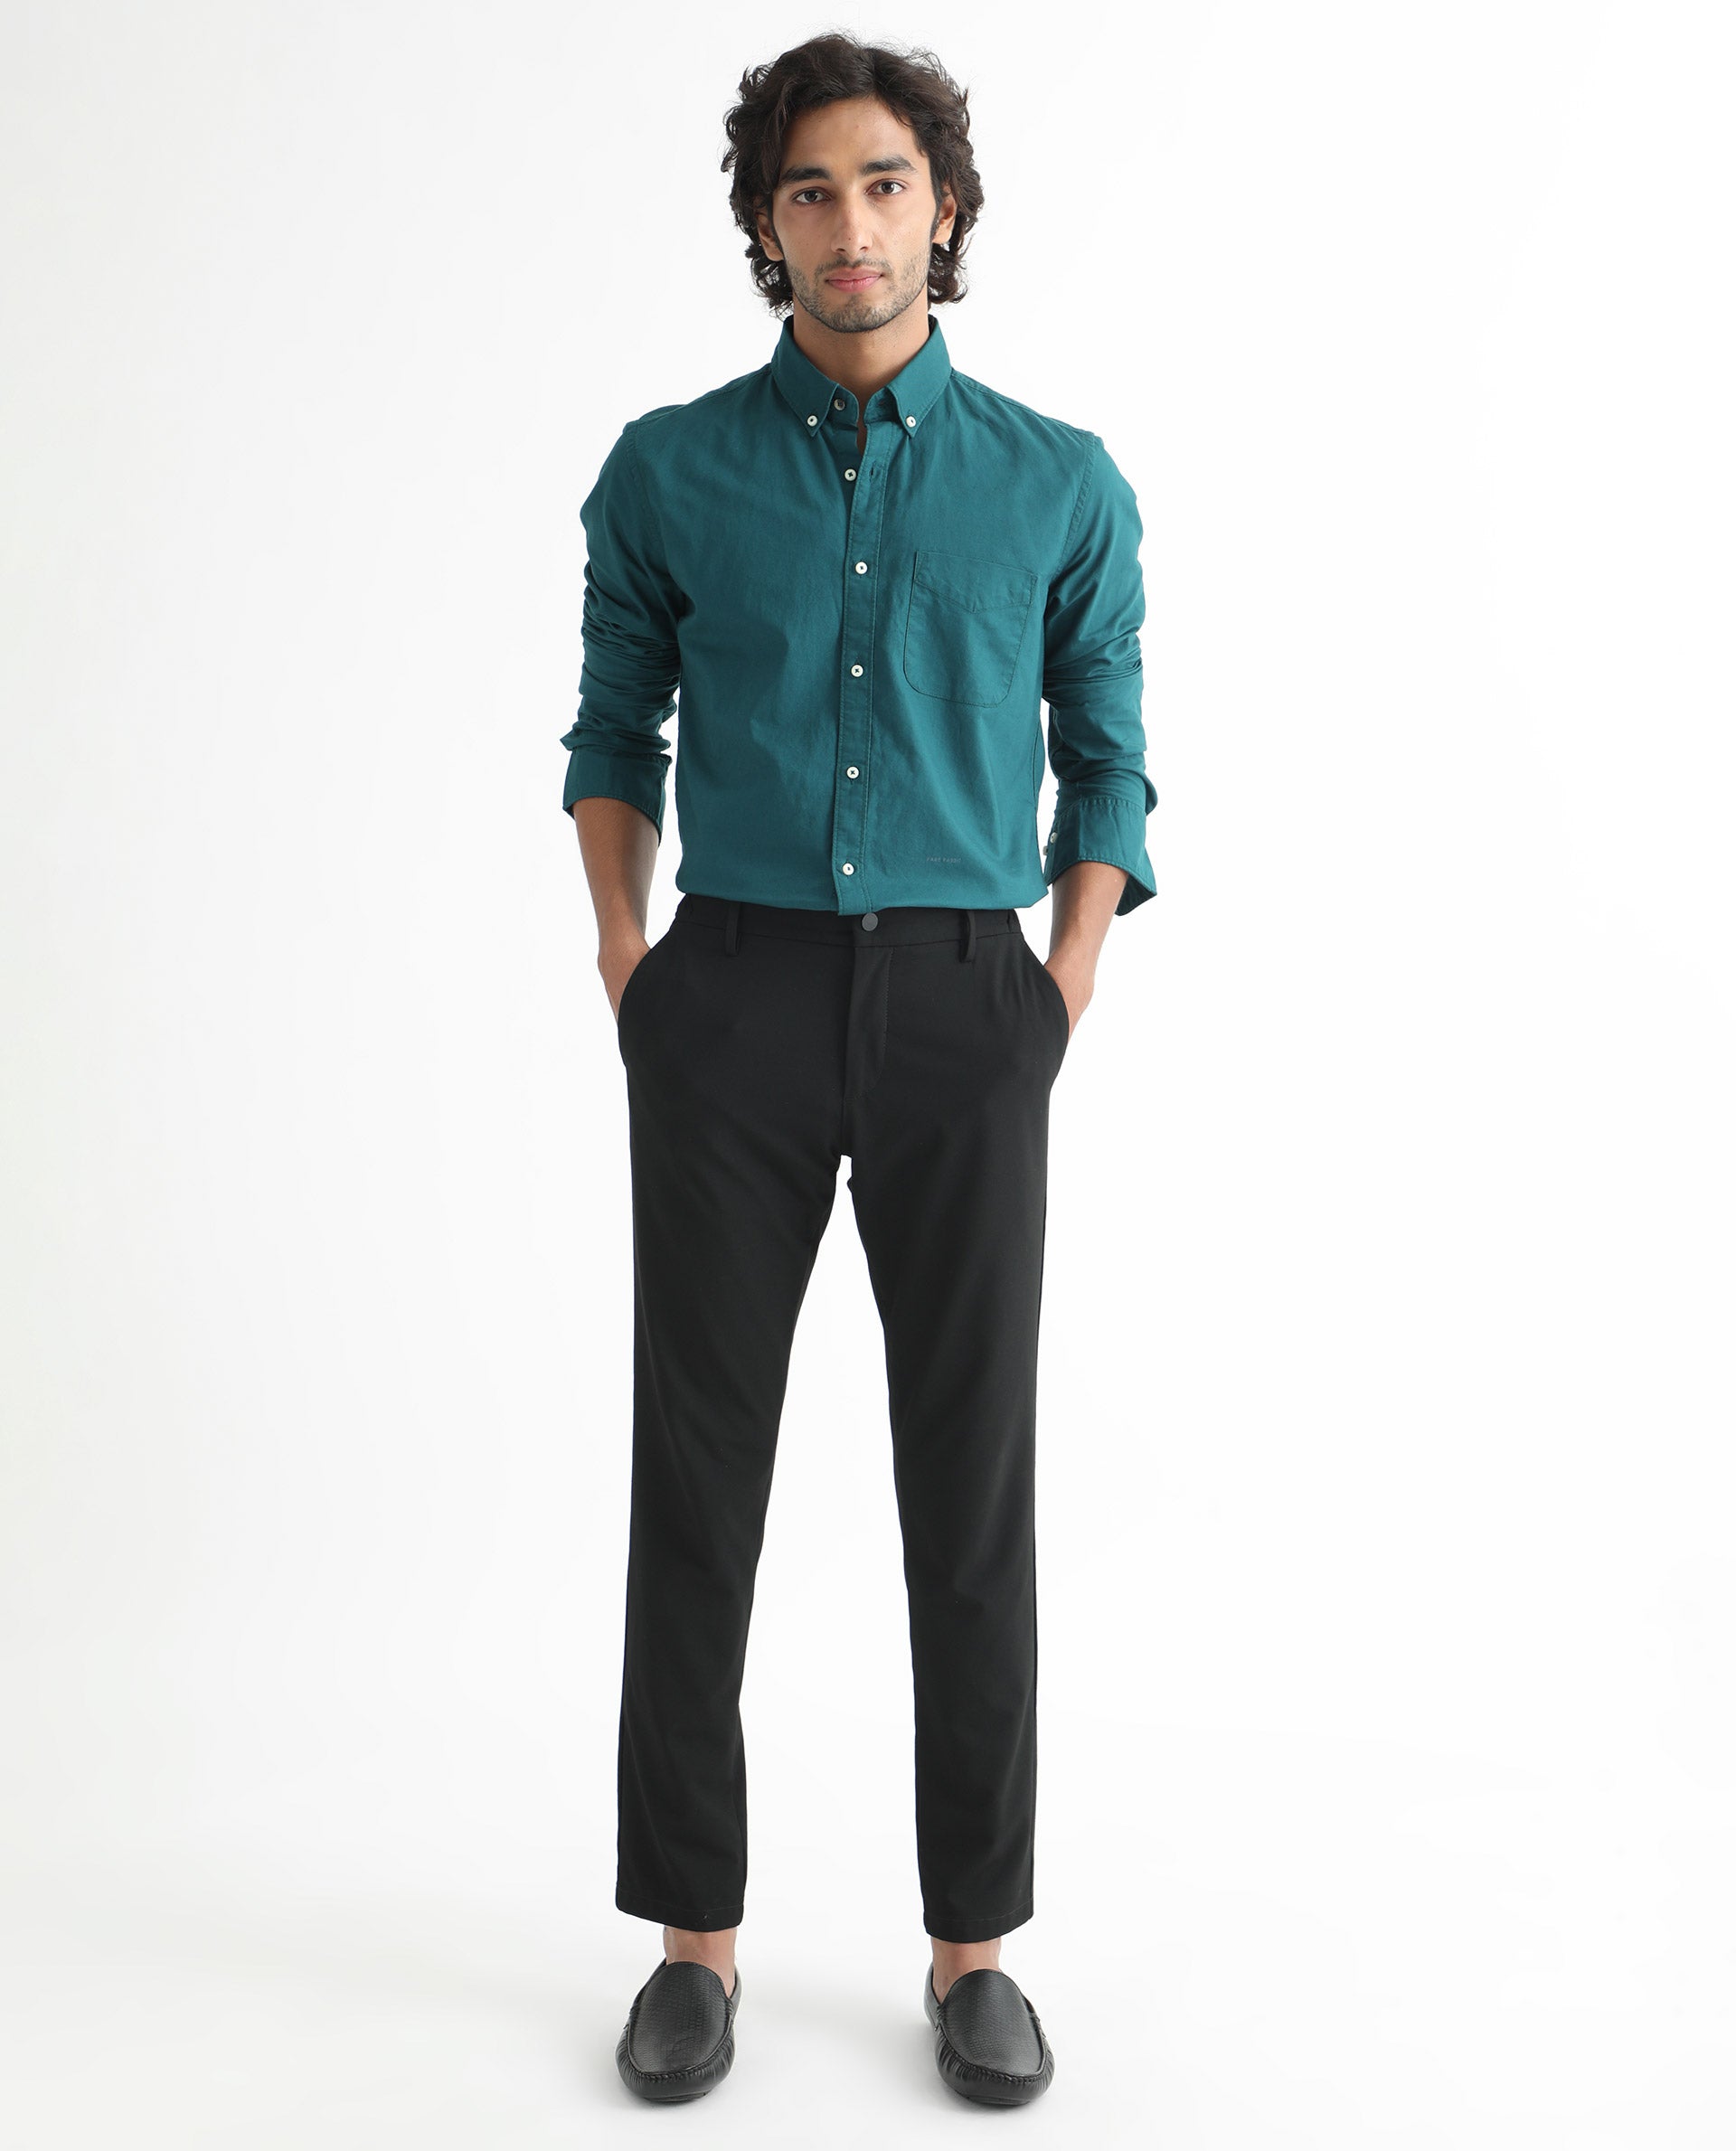 What Color Pants Go With A Green Shirt With Pics  Ready Sleek